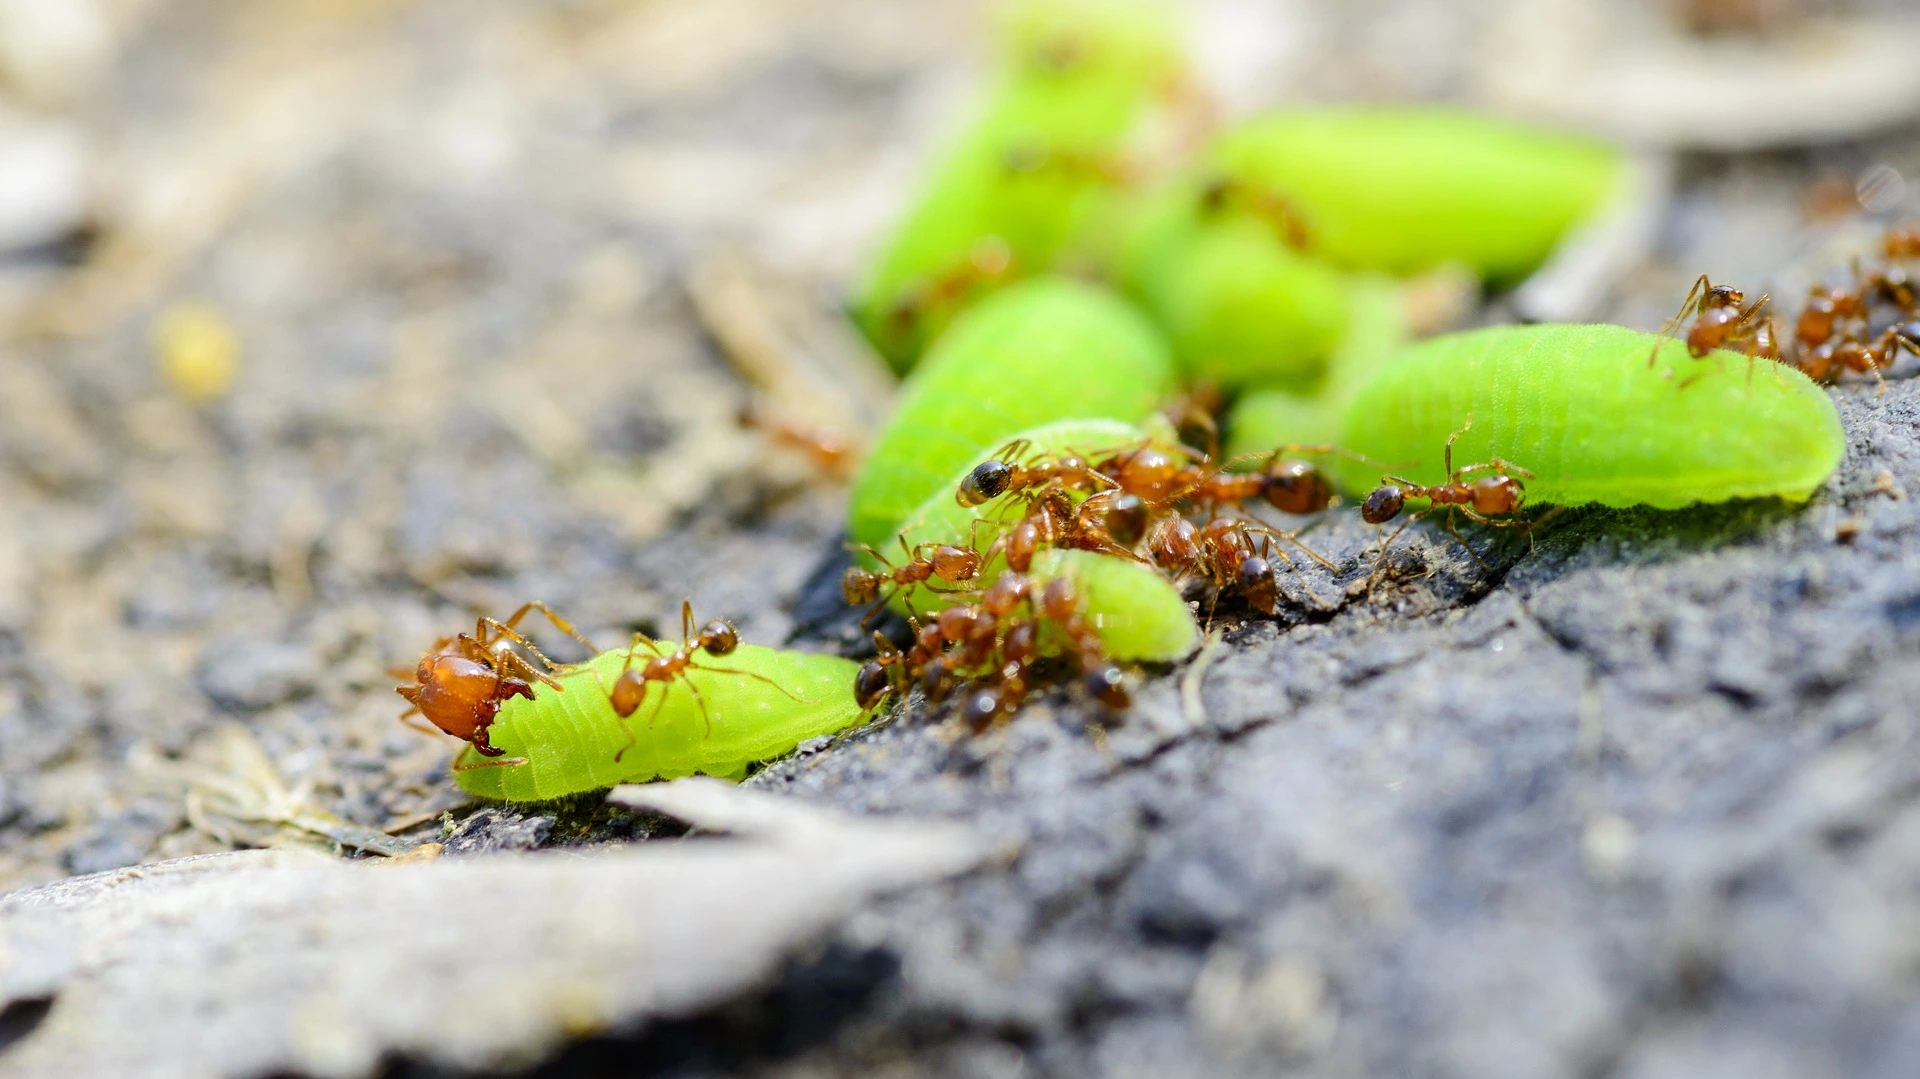 Residential Fire Ant Control in North Texas